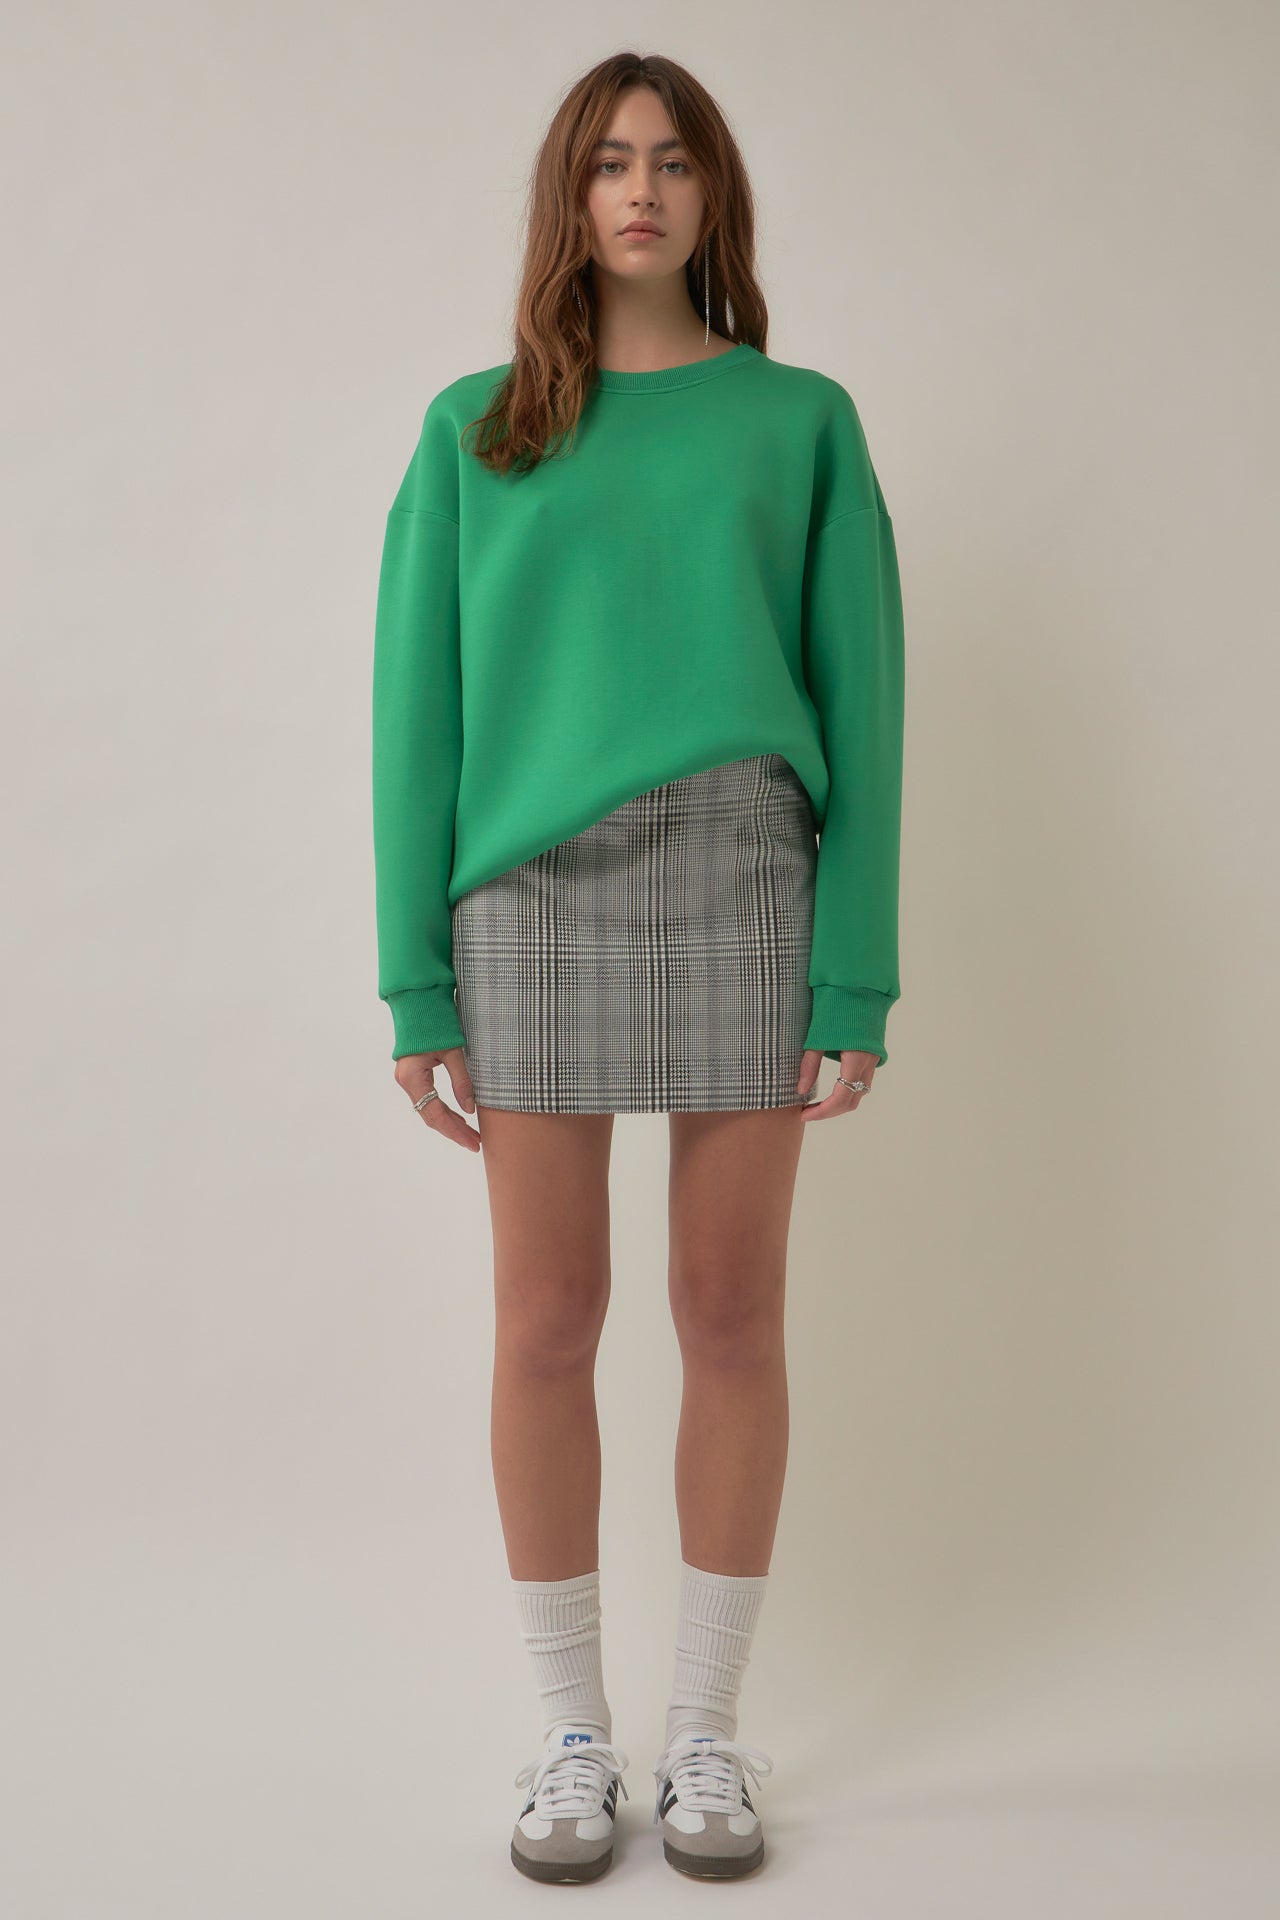 GREY LAB-Sequins Plaid Mini Skirt-SKIRTS available at Objectrare